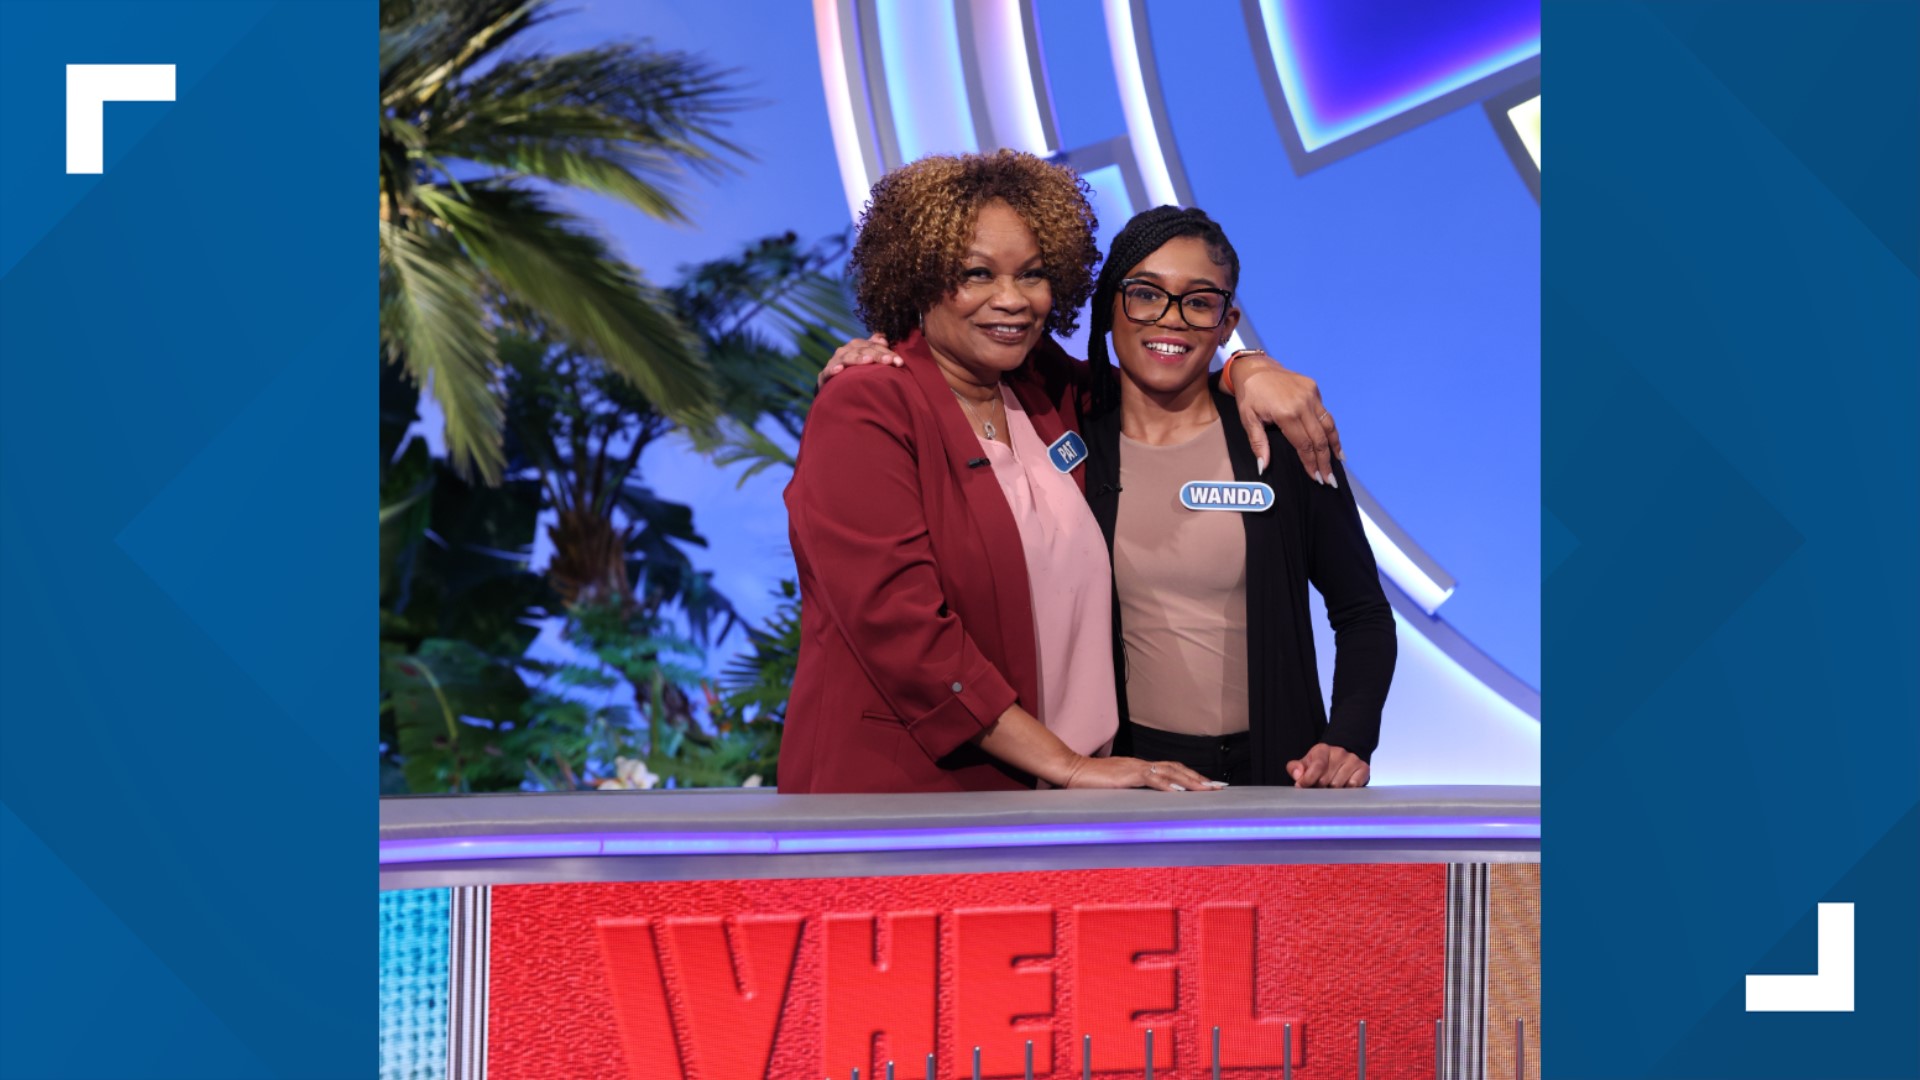 Pat and Wanda from Virginia Beach are taking on Wheel of Fortune.